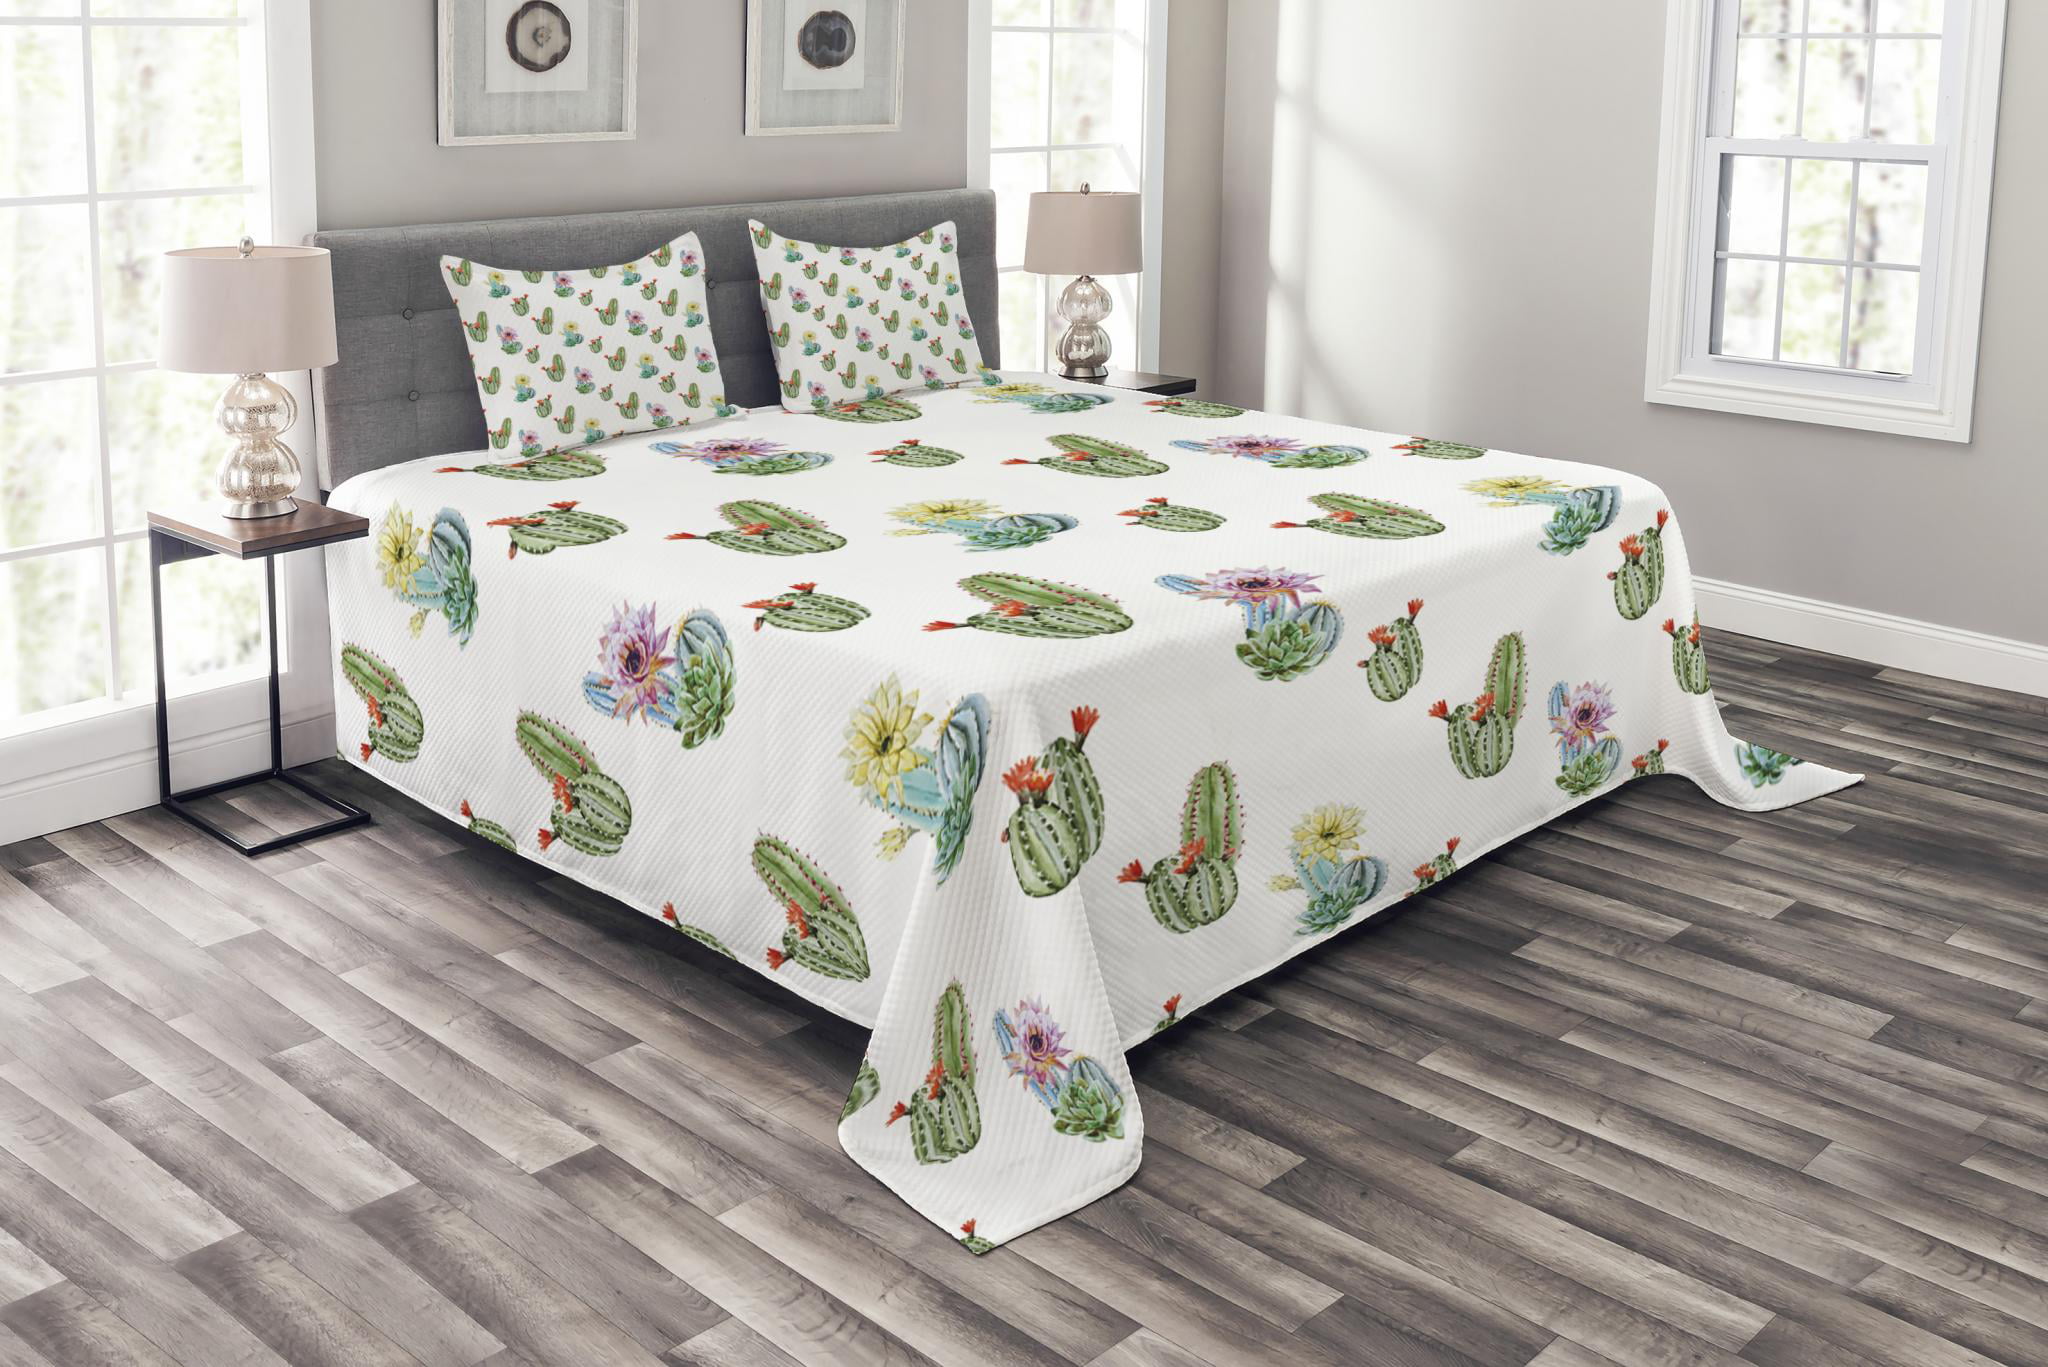 Decorative 3 Piece Bedding Set with 2 Pillow Shams Ambesonne Cactus Duvet Cover Set Pastel Green Queen Size Thorny Vintage Hawaiian Nature Flourishing Succulents and Cactus Bouquets Picture